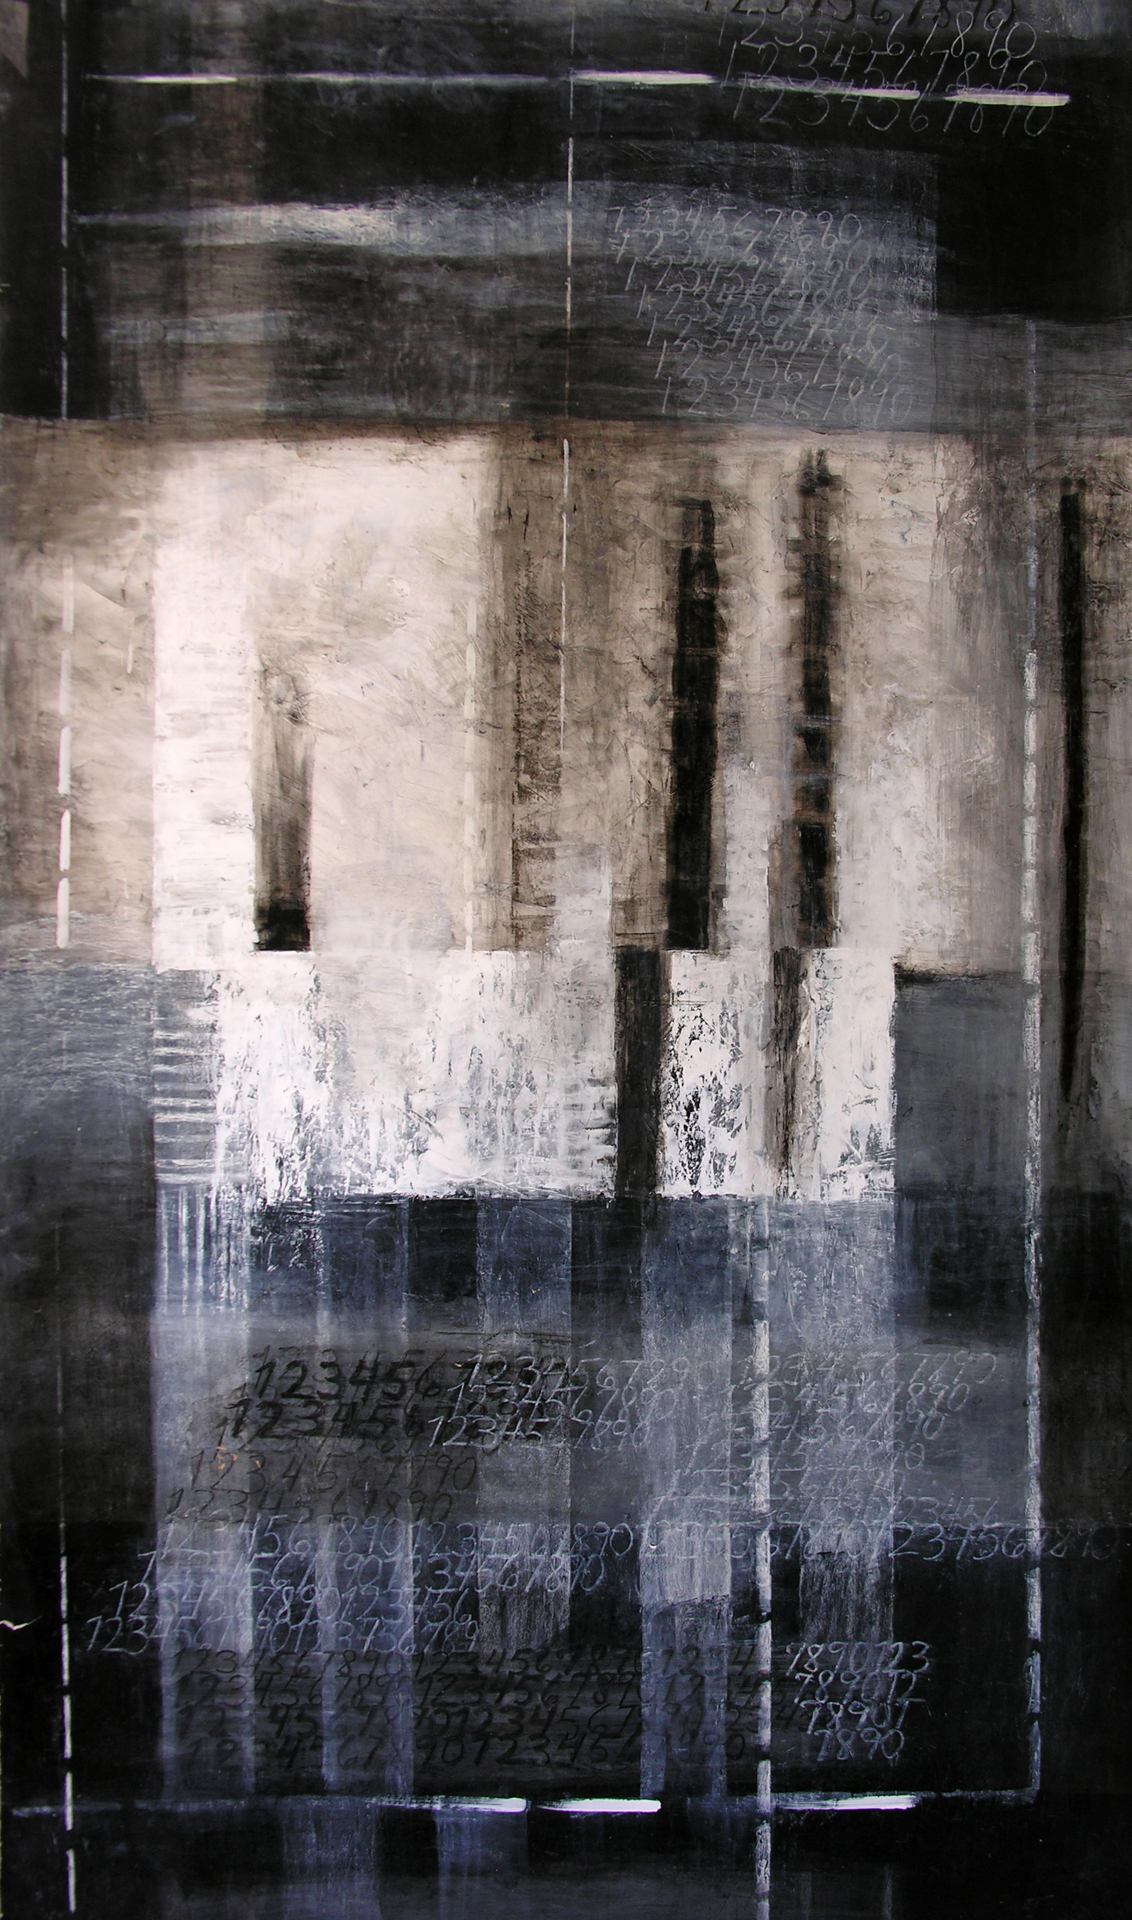 "Ocean Stories Series: DNA", Acrylic, Charcoal, Chalk, 50"W x 144"H